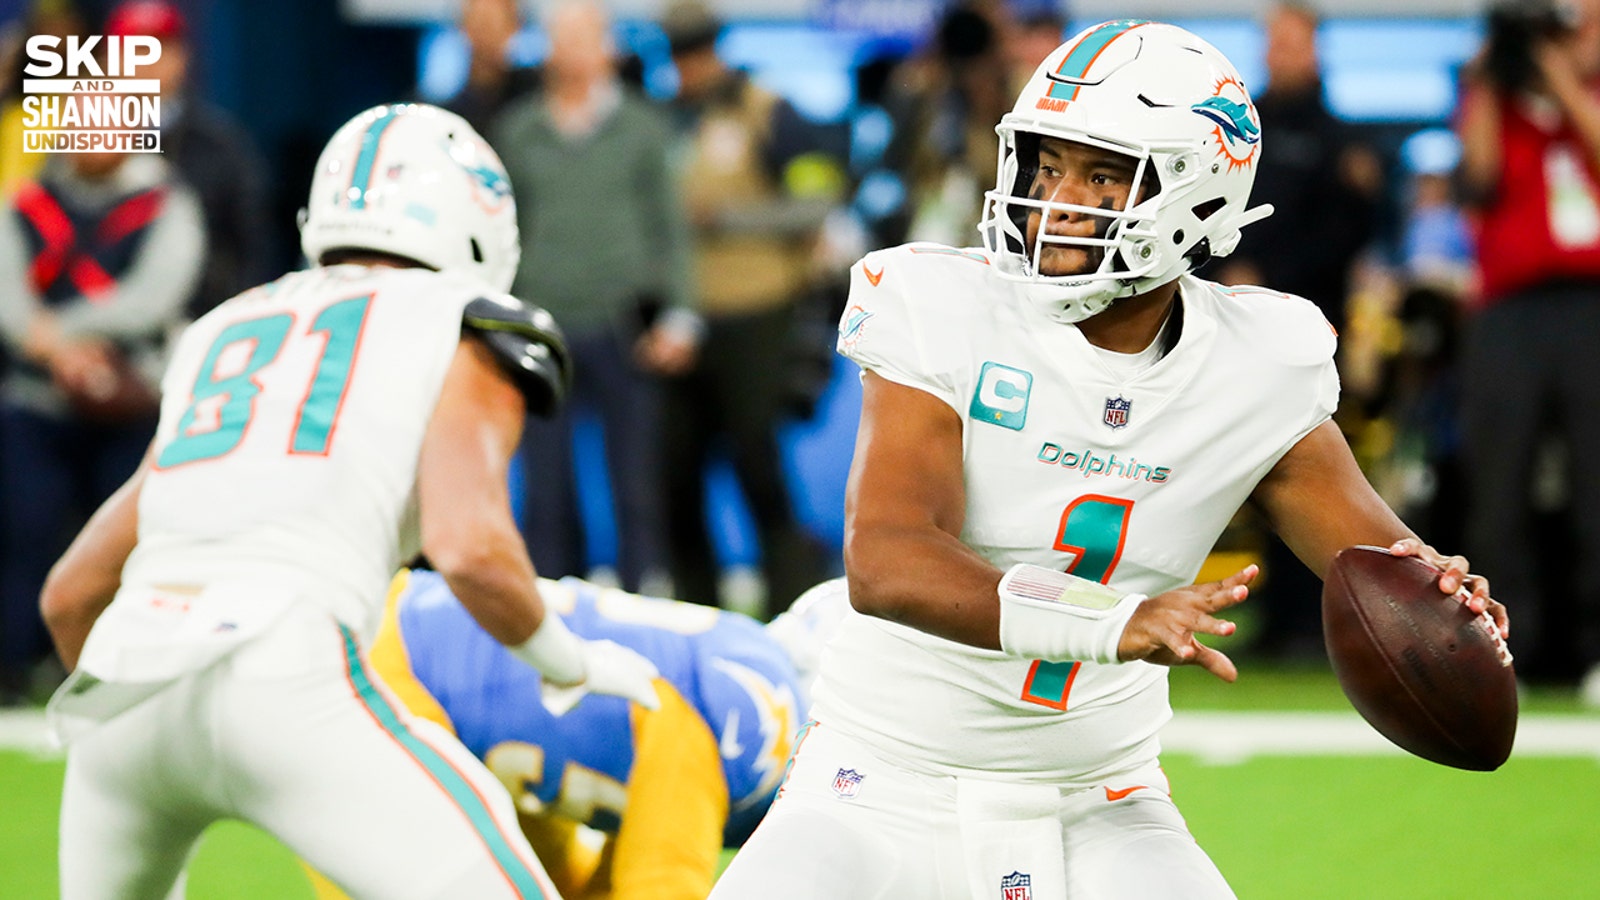 Tua Tagovailoa struggles in Dolphins' loss to Chargers